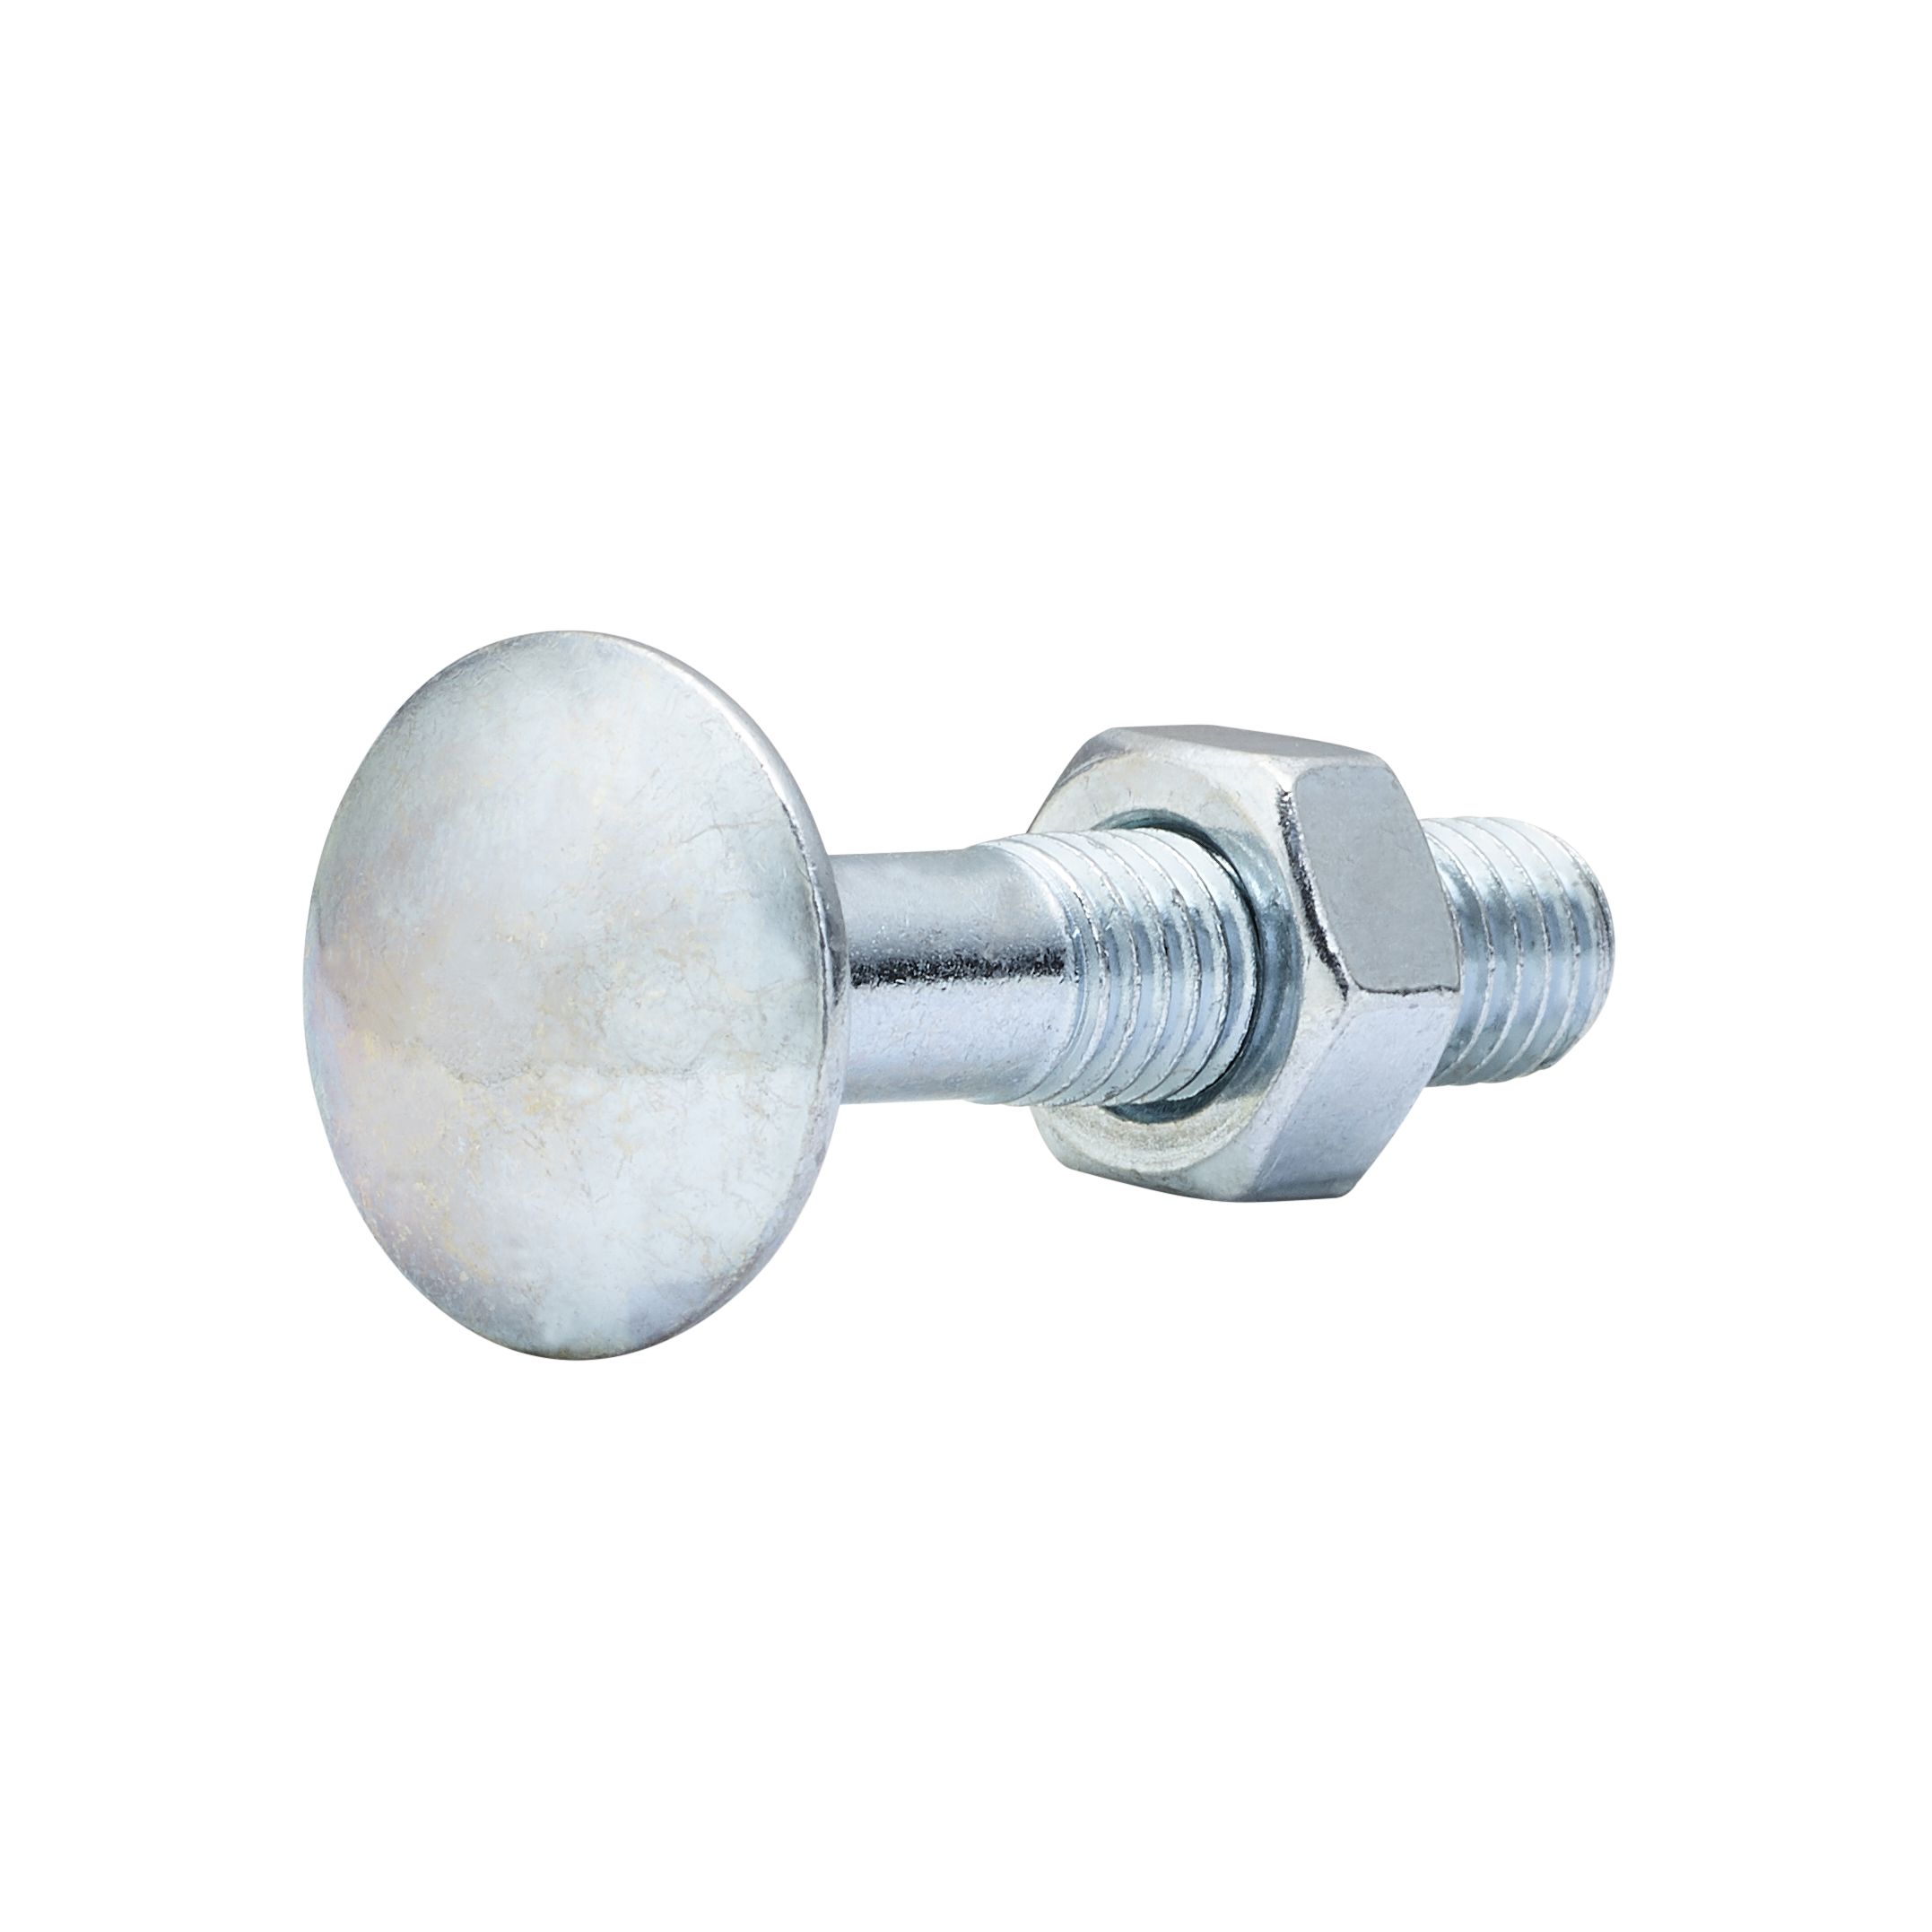 Diall M8 Coach bolt & nut (L)40mm, Pack of 10